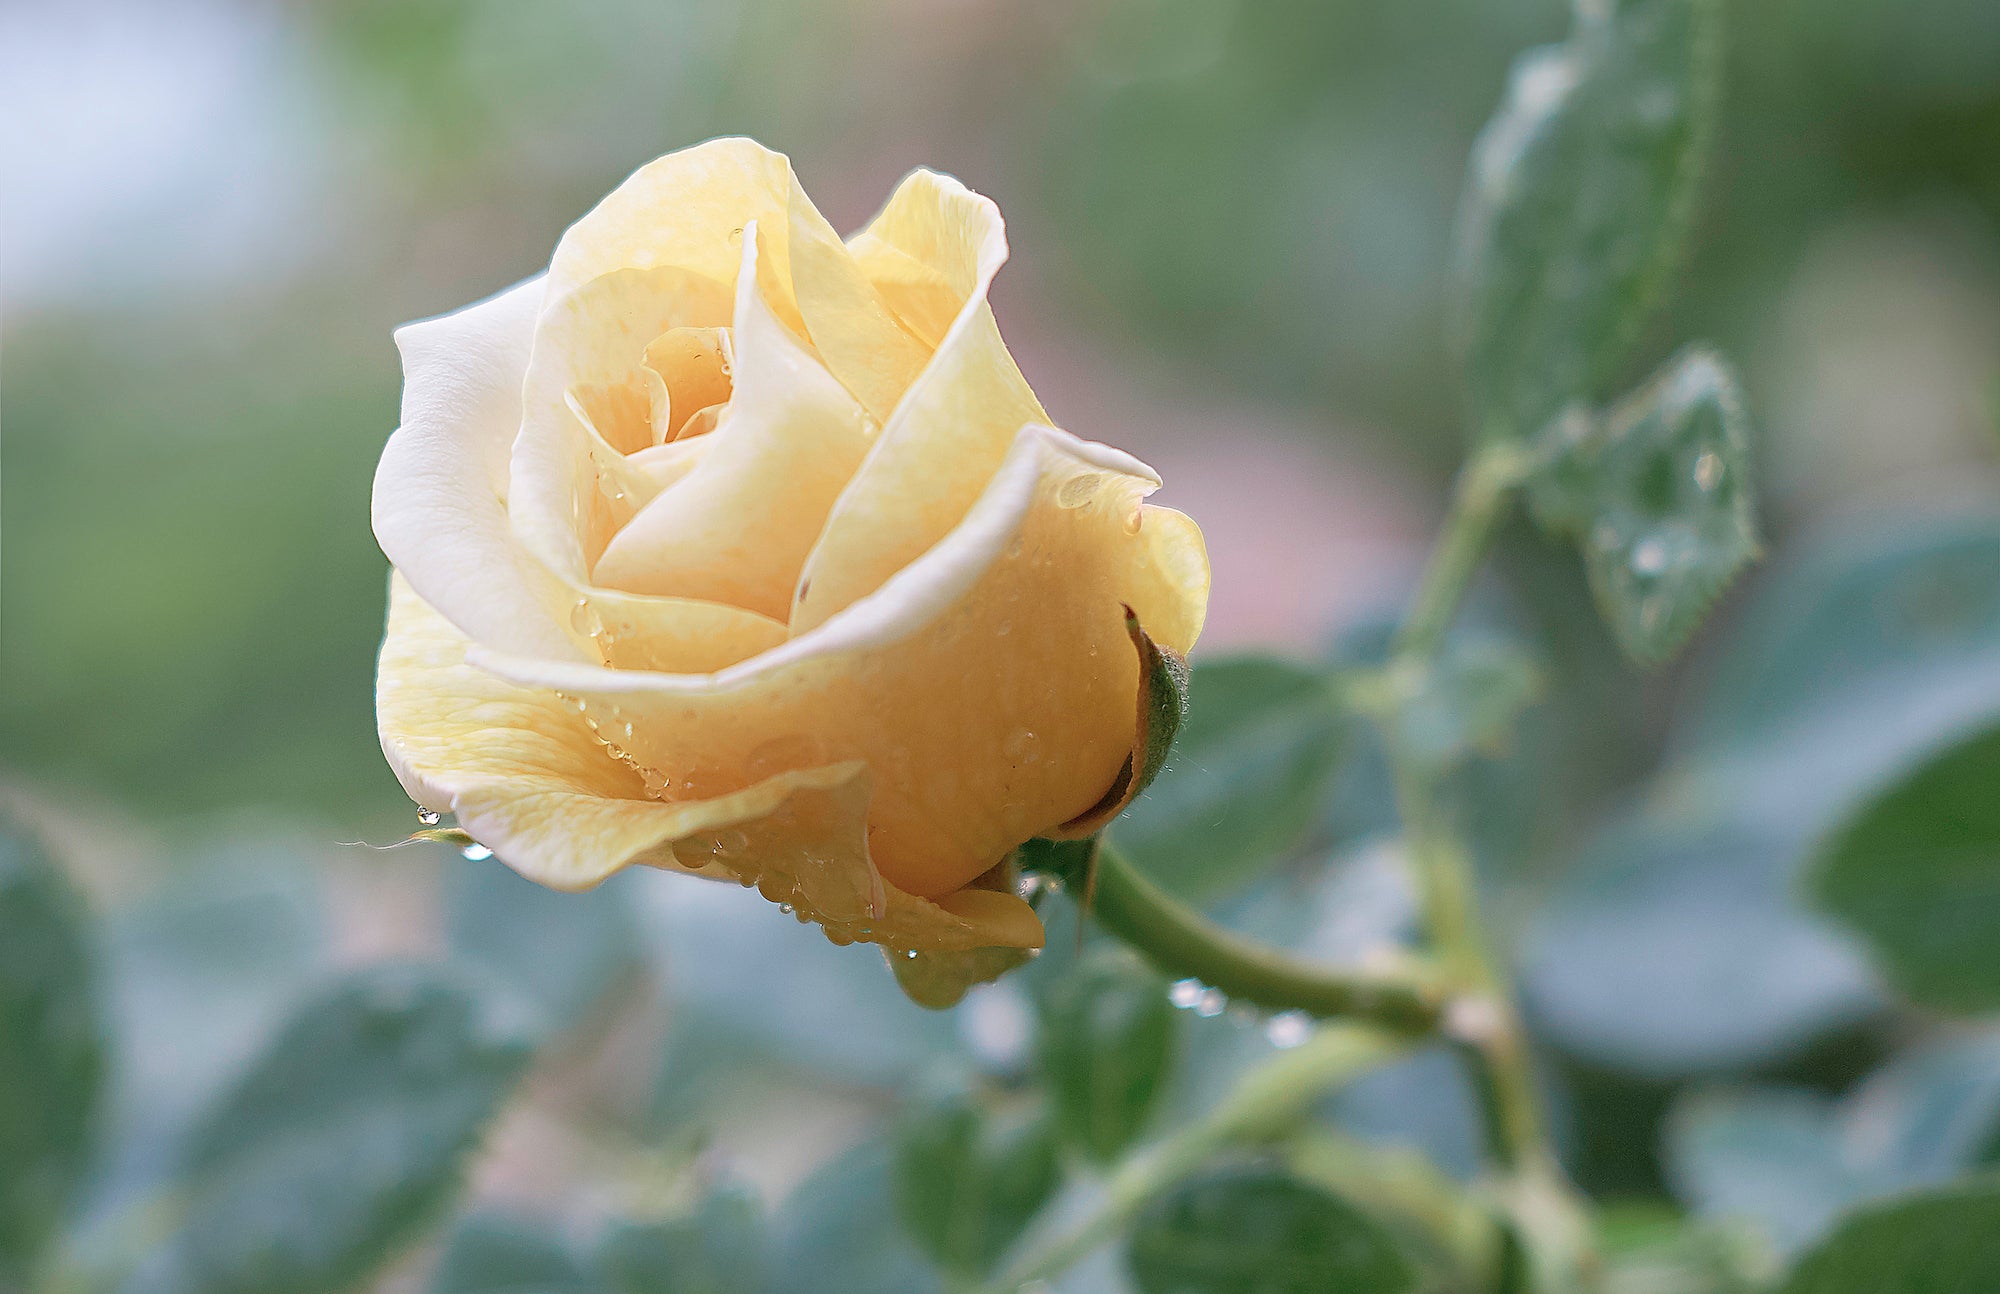 Growing Roses: How to Plant and Care for Roses